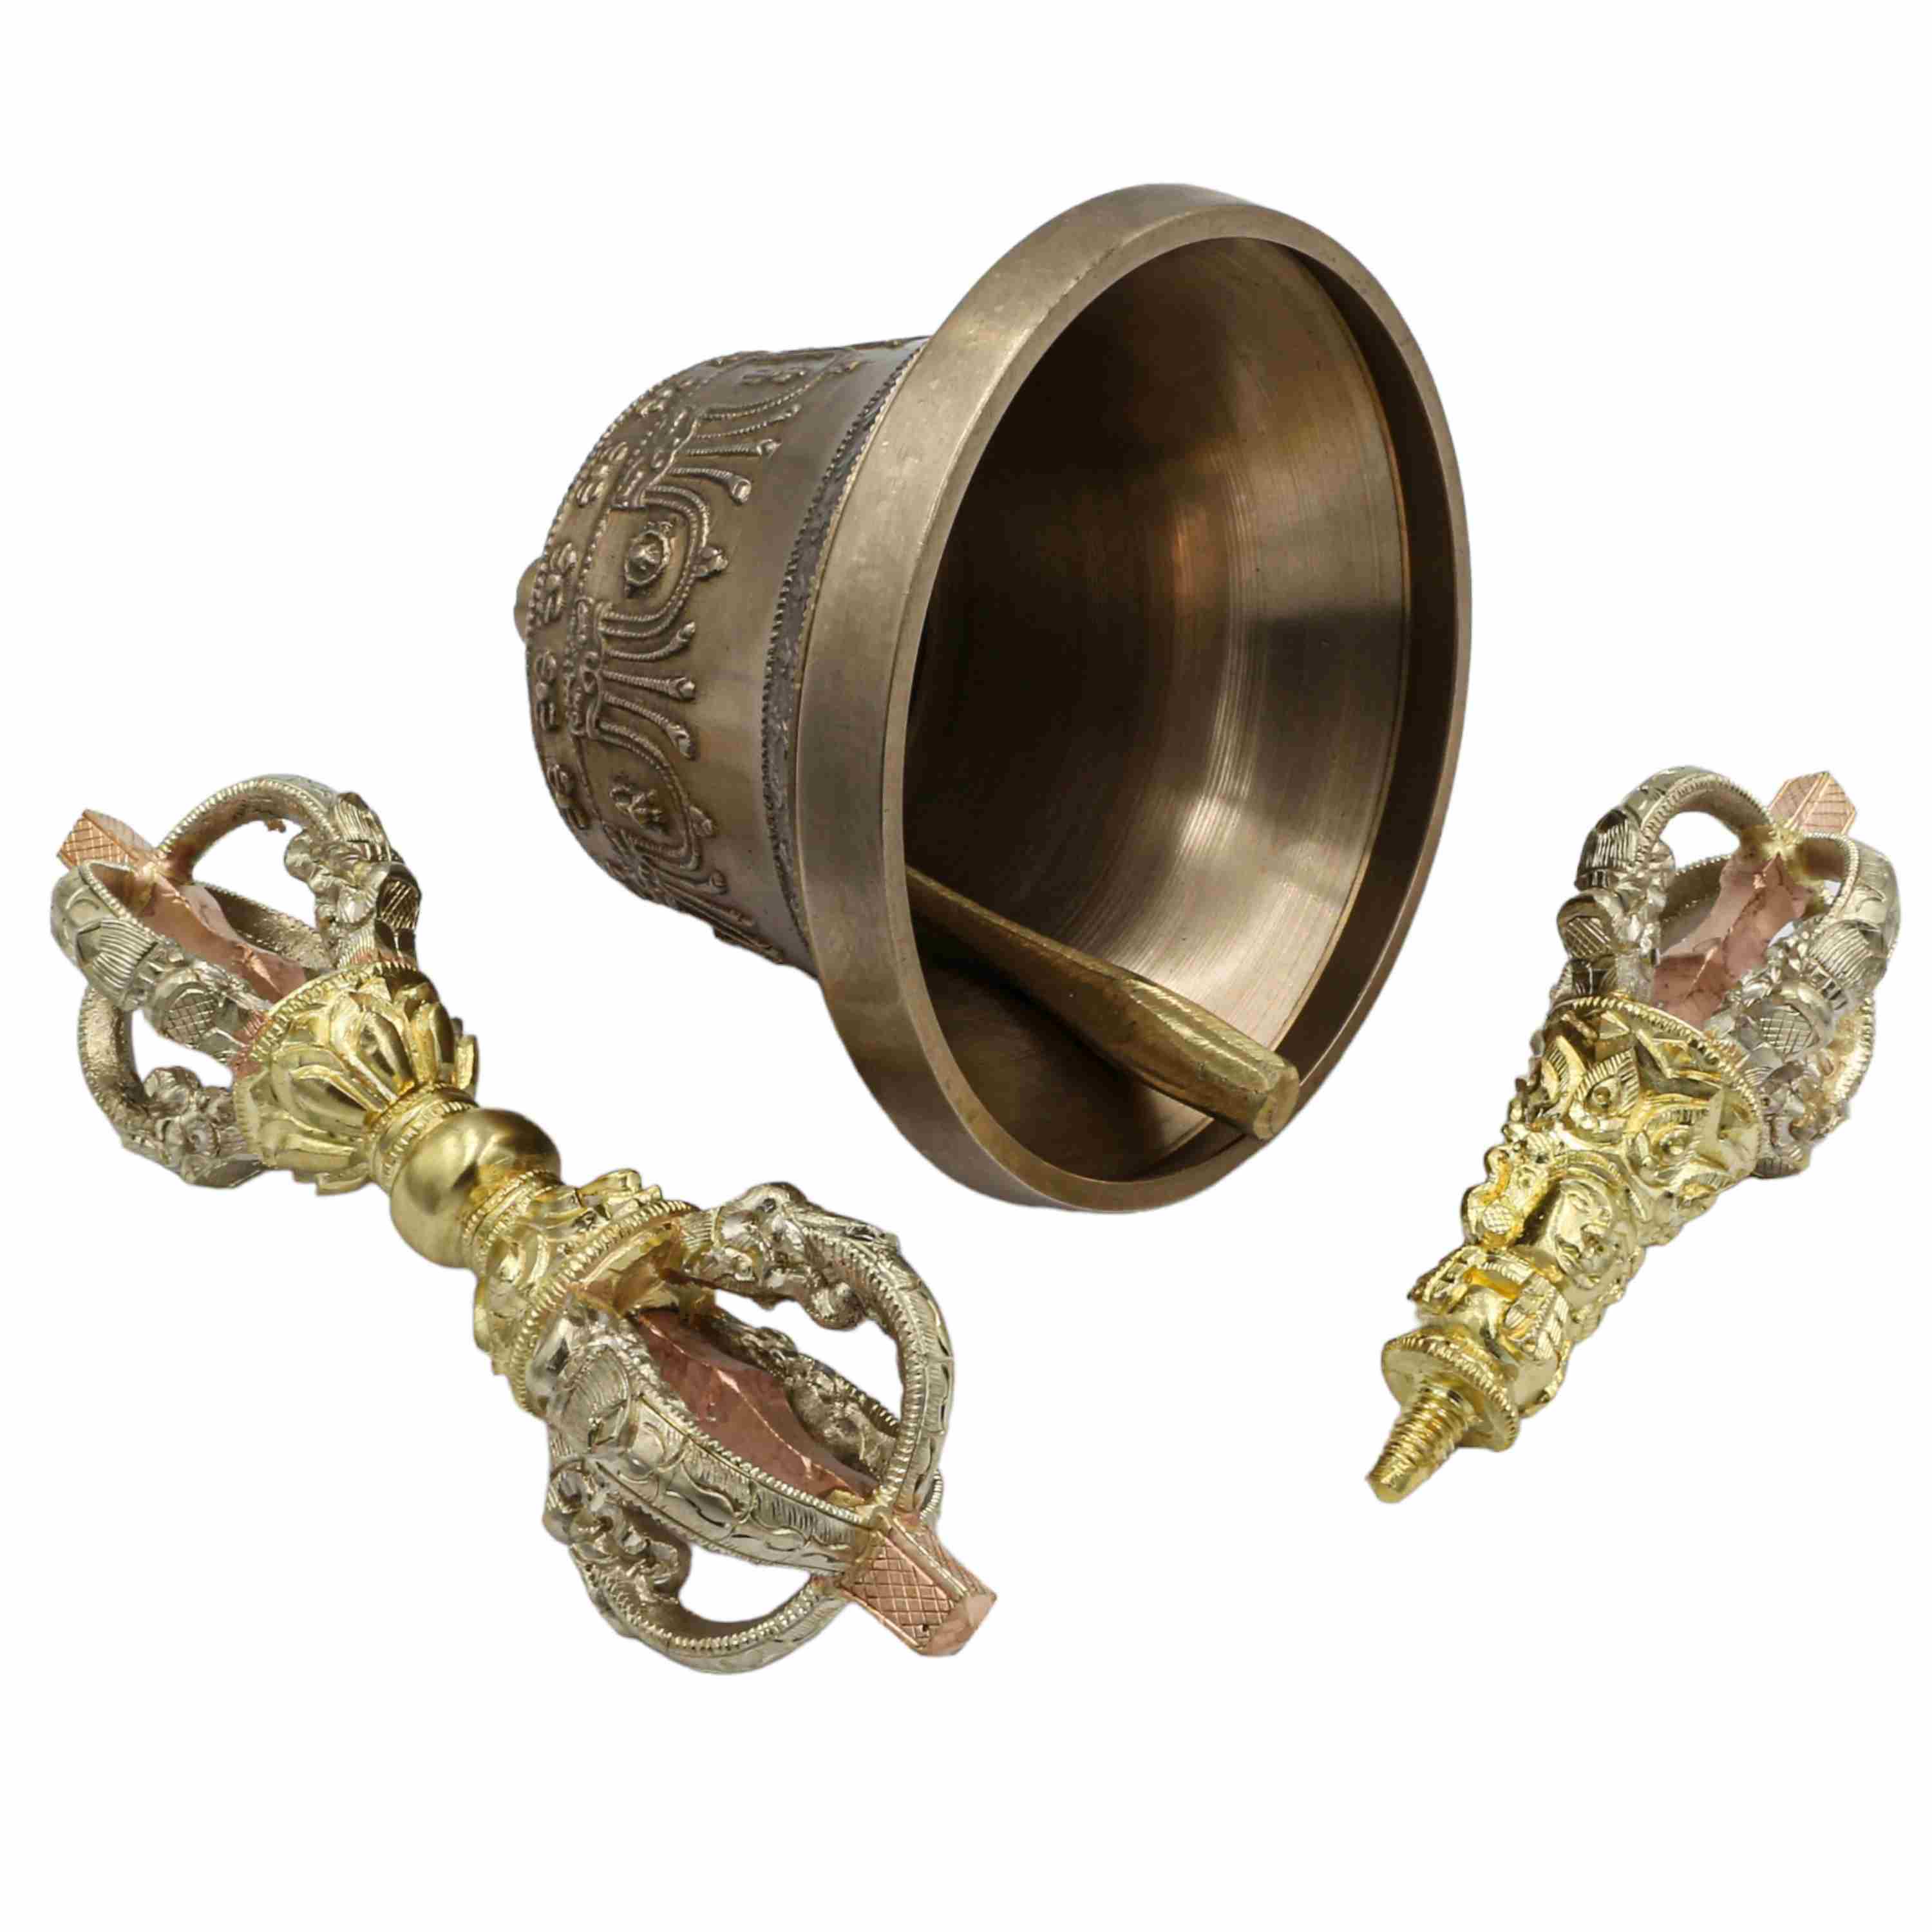 dehradun, Bell And Dorje, Pure Bronze Bell And Dorje vajra, Golden & Silver Plated Handle And Vajra